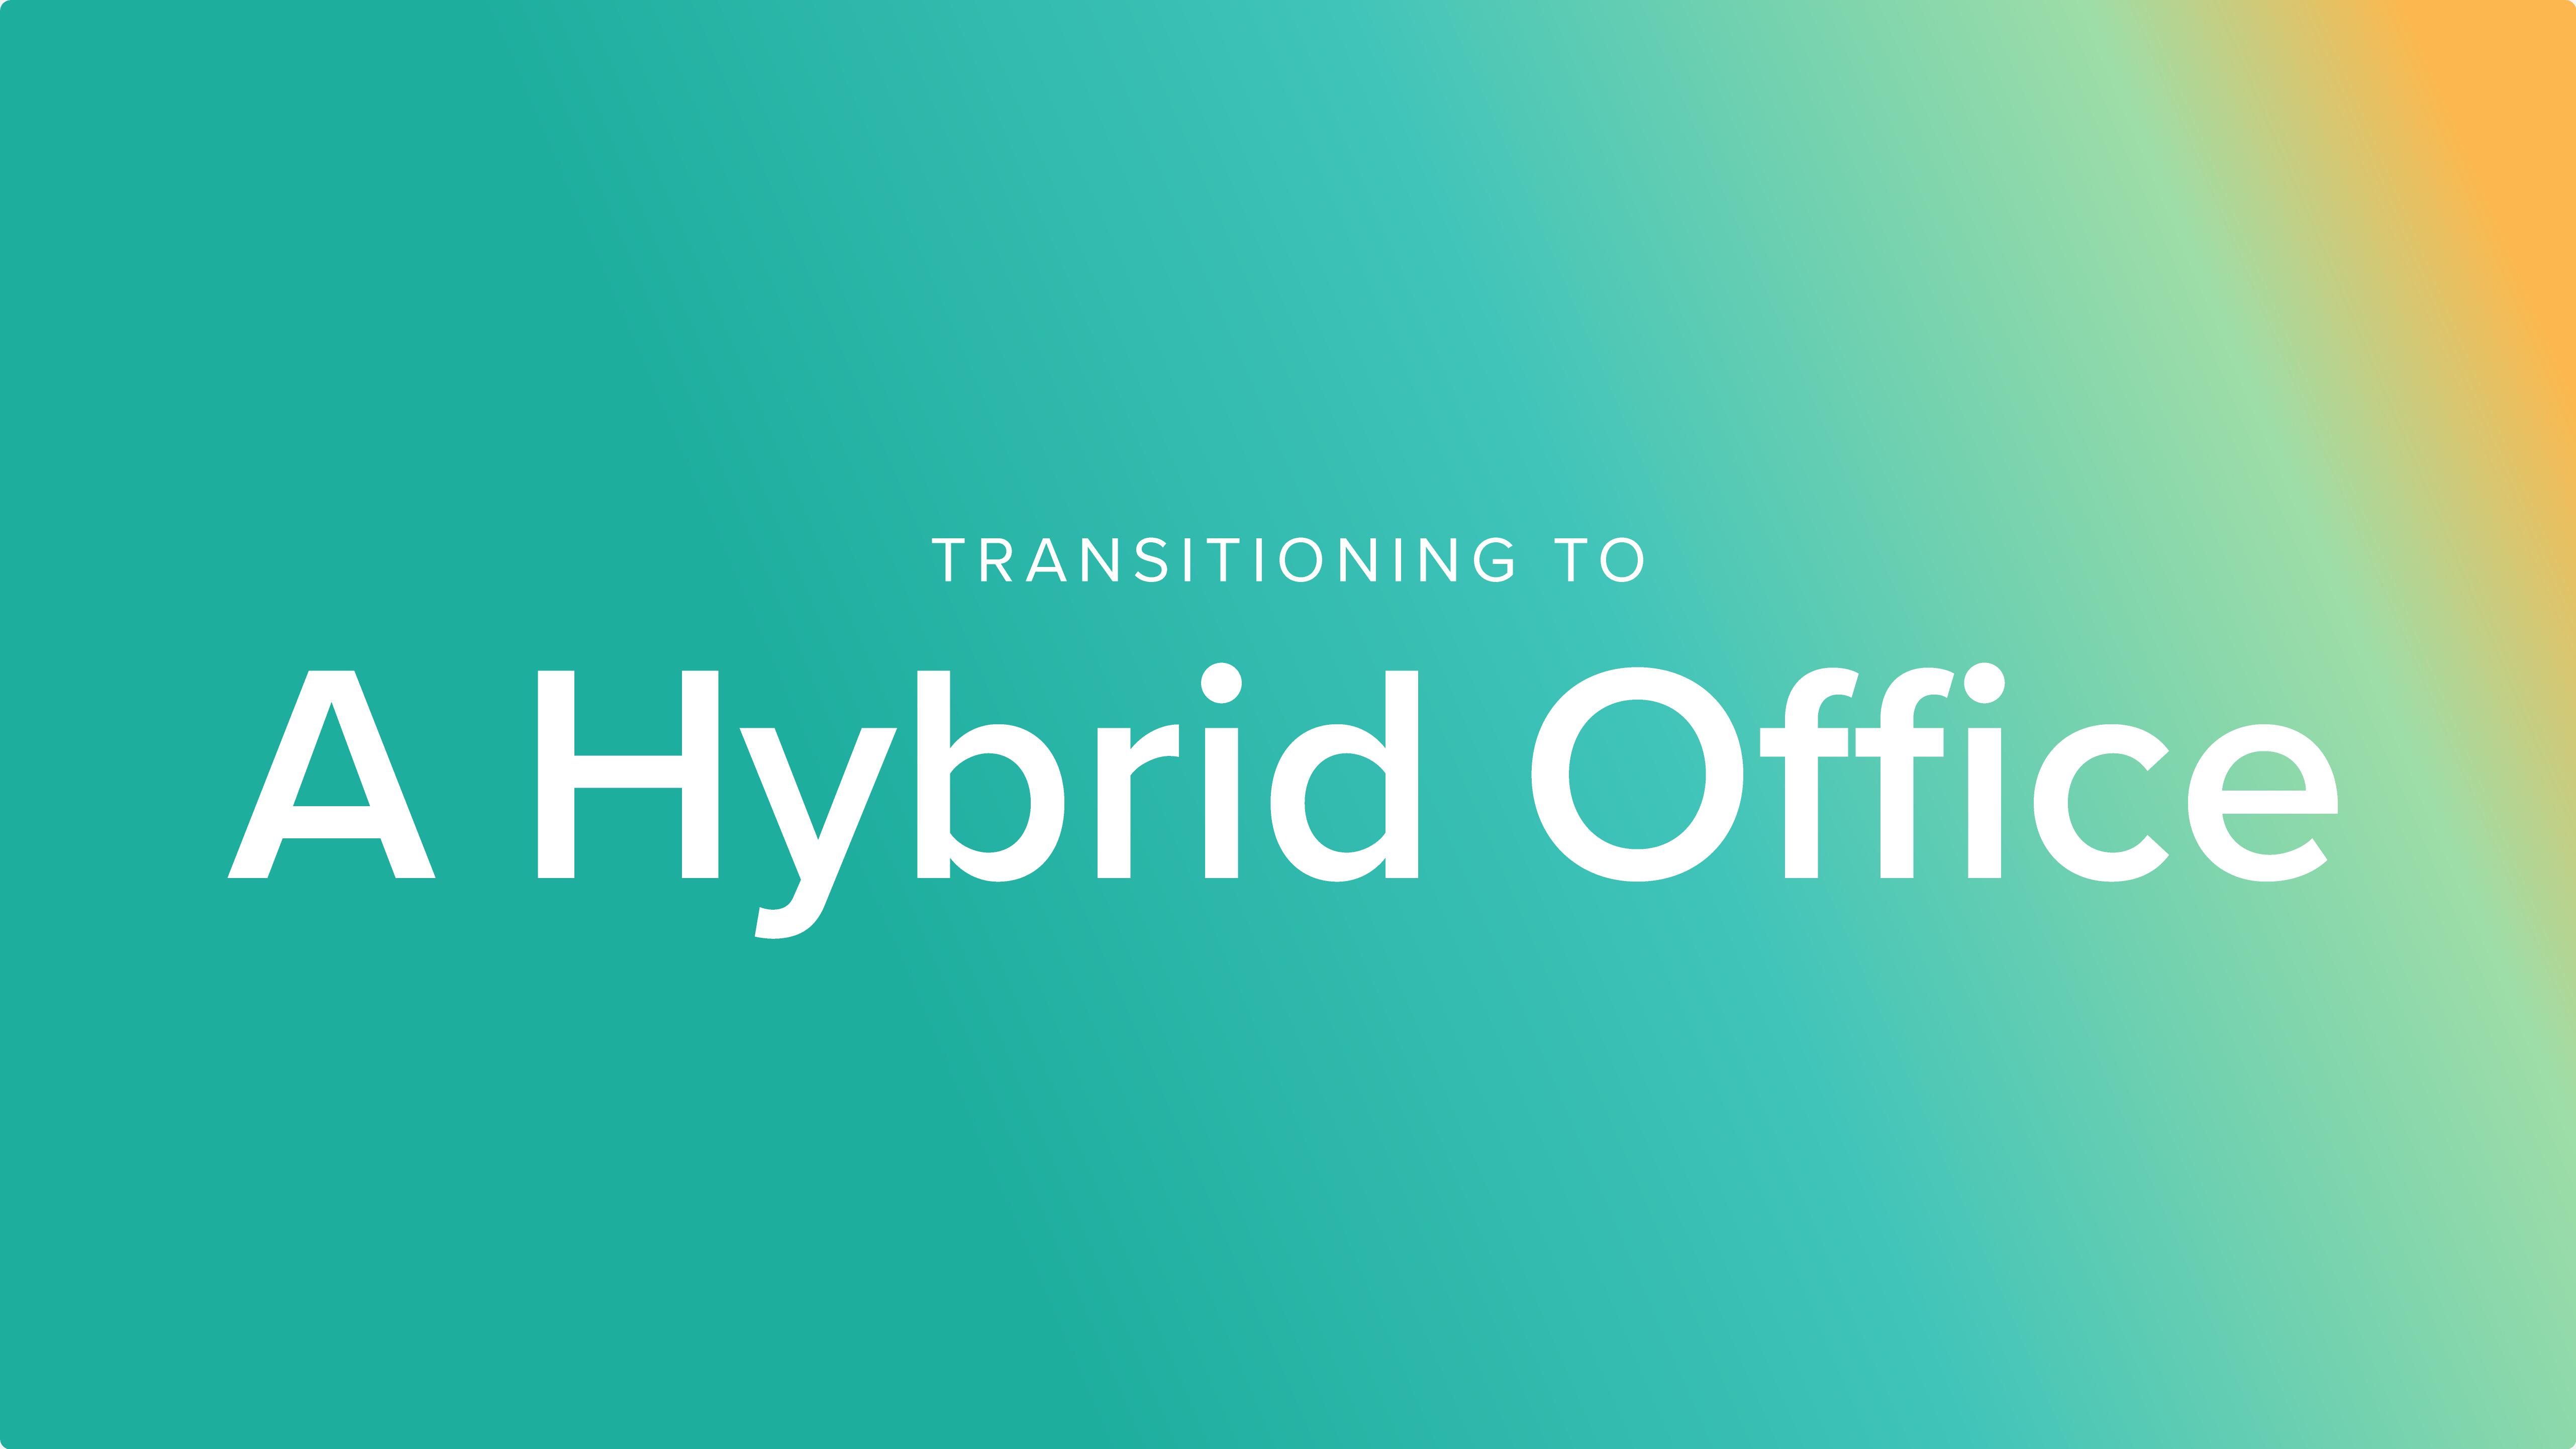 Transitioning to a hybrid office